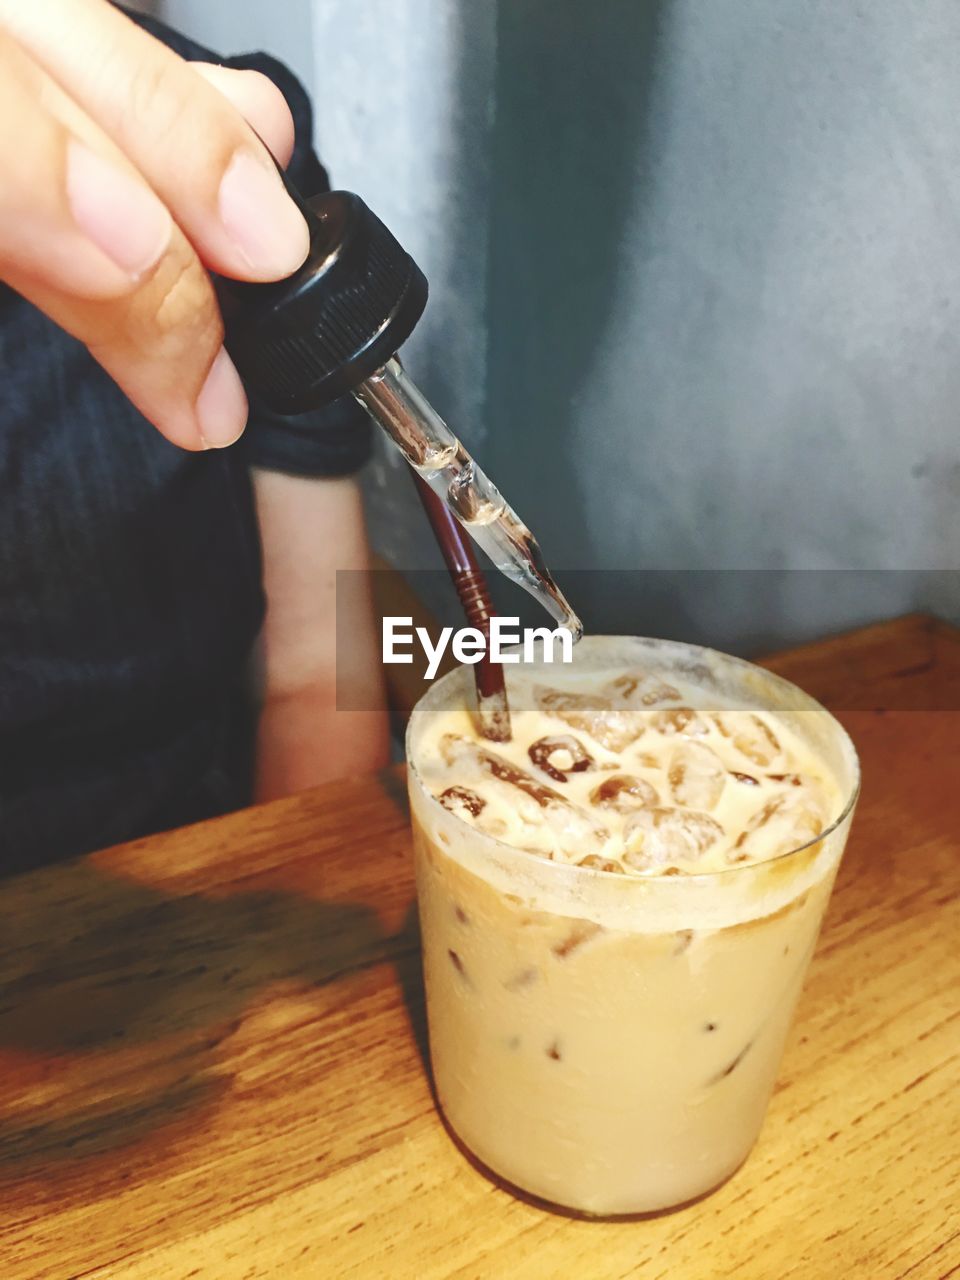 Cropped image of person adding liquid in iced coffee through dropper at restaurant